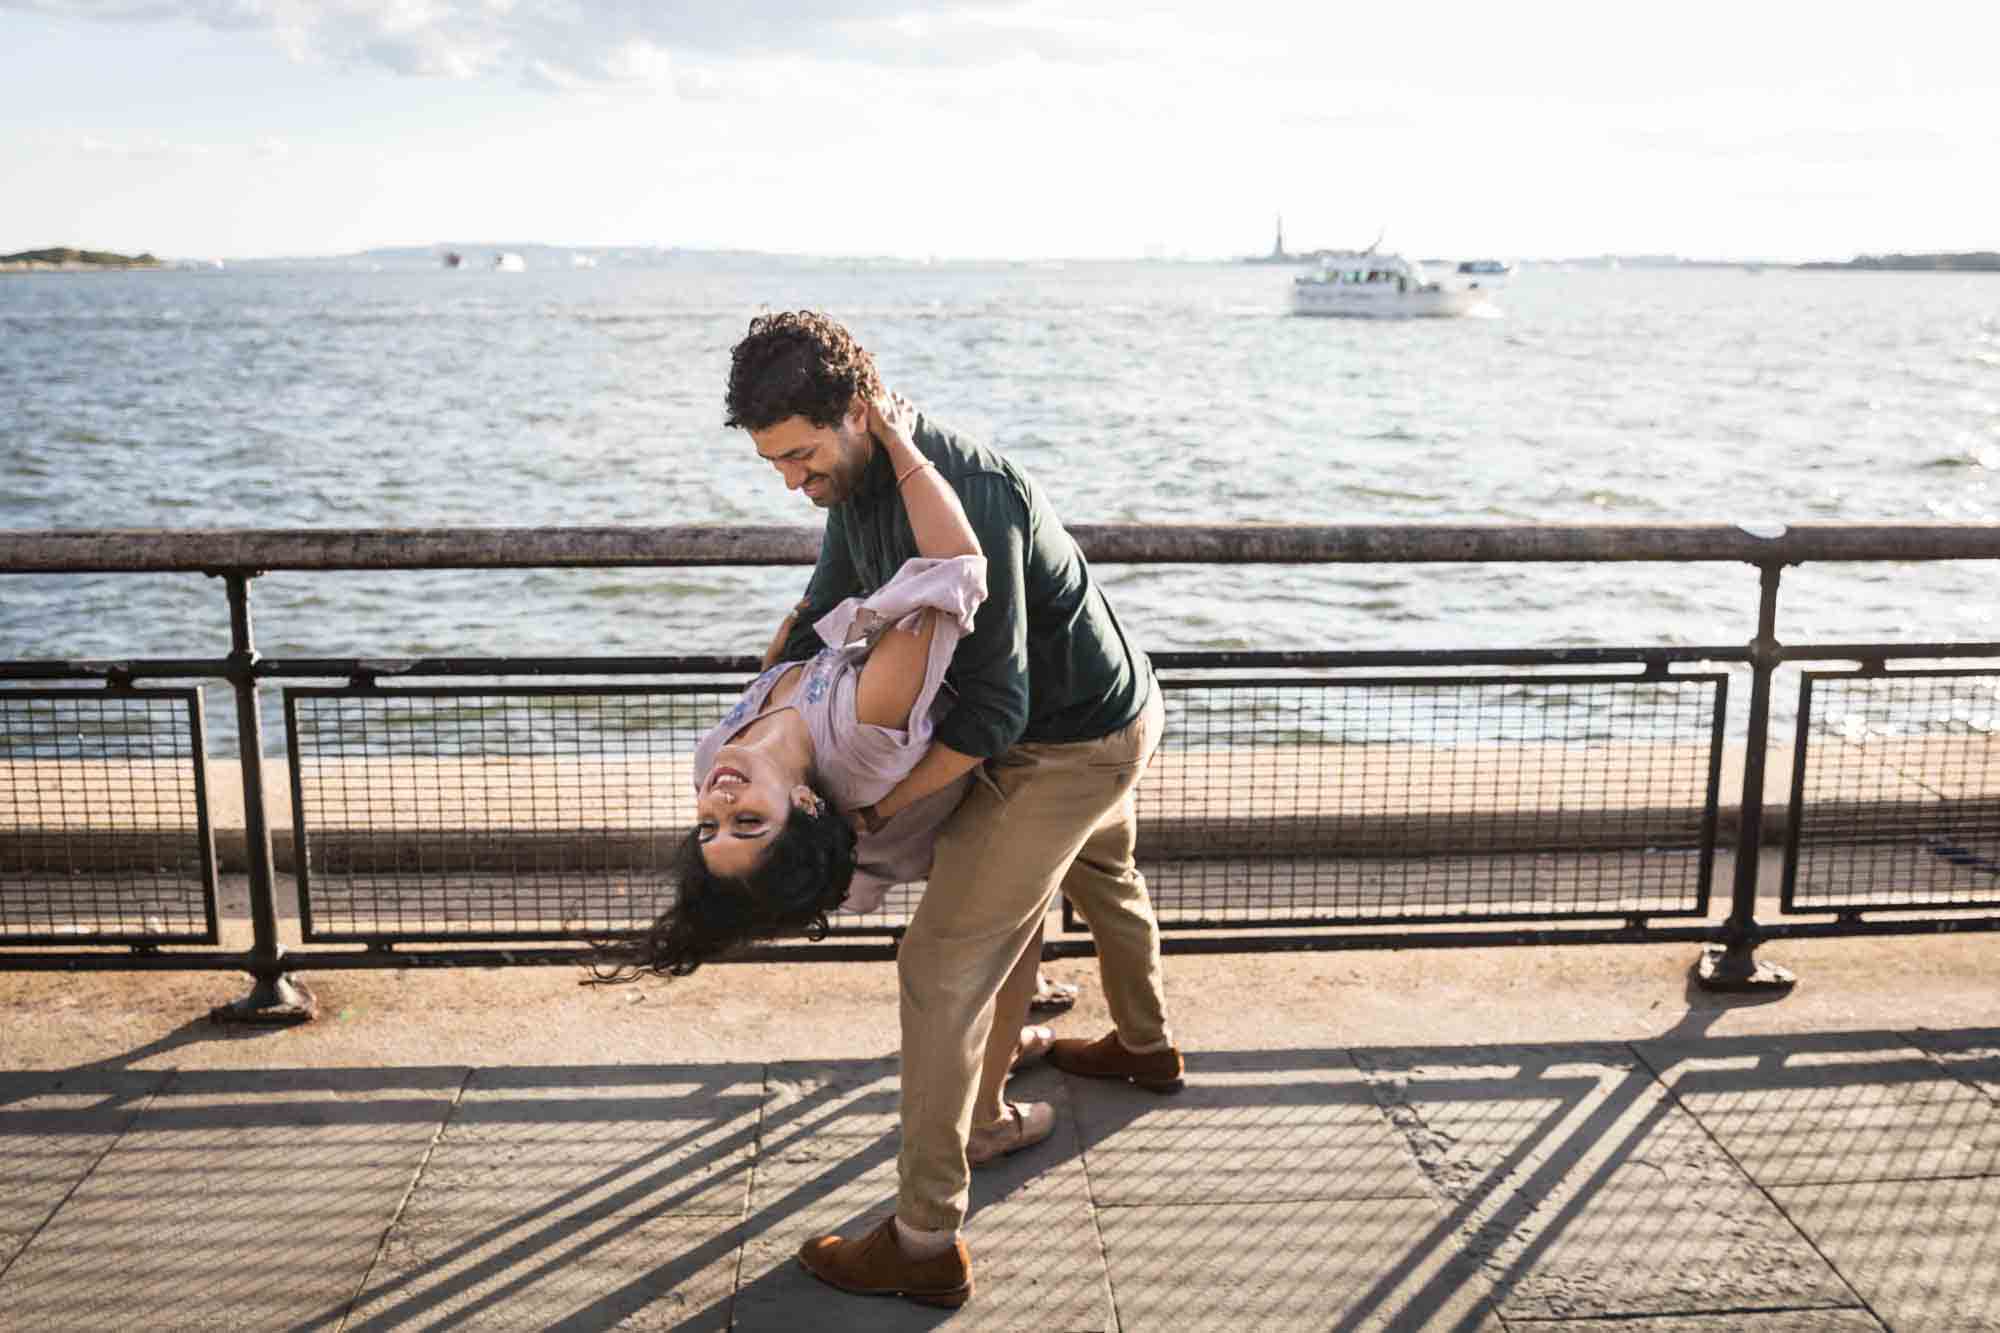 Battery Park engagement photos ofman dipping woman while dancing in front of NYC waterfront